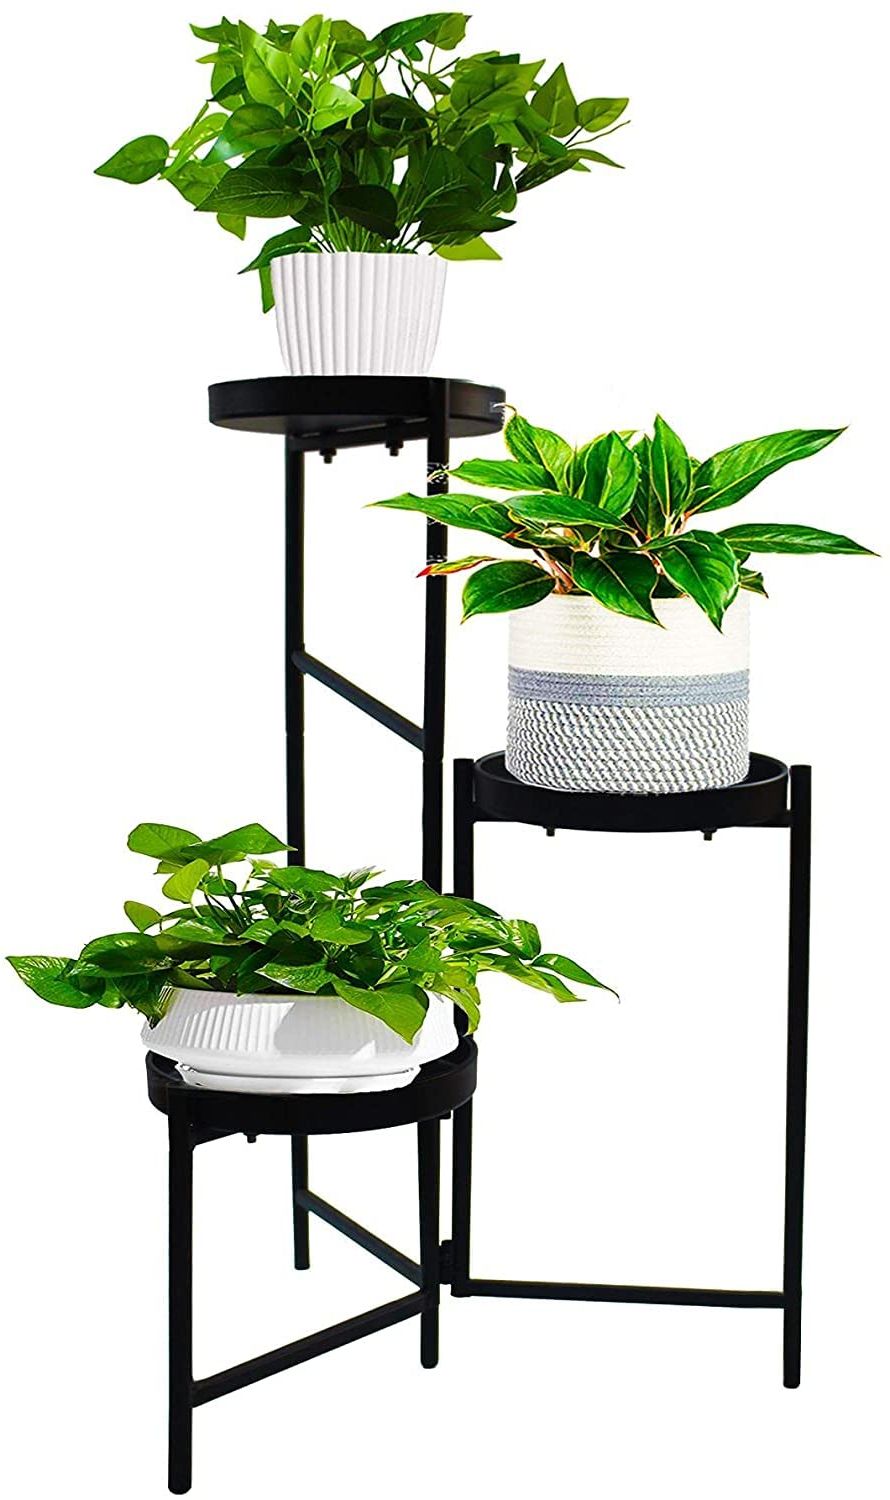 Iron Base Plant Stands Pertaining To Newest Metal Plant Stand Outdoor 3 Tier Flower Pot Holder Wrought Iron Plants Rack  Indoor Corner Stands Display Shelf Fold Vertical Planter Shelves Table For  Garden Patio Lawn Balcony Office Black Round (View 4 of 10)